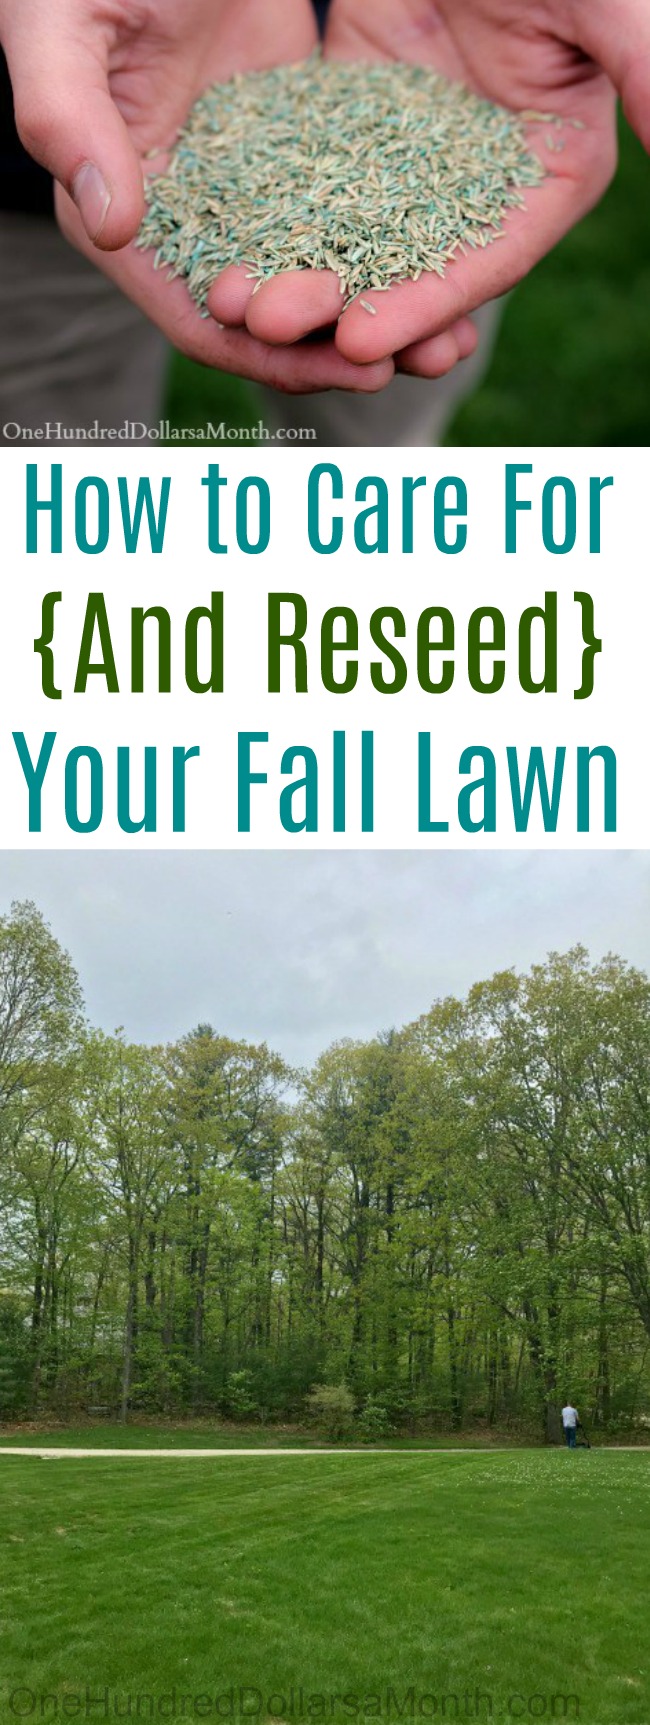 How to Care For {And Reseed} Your Fall Lawn